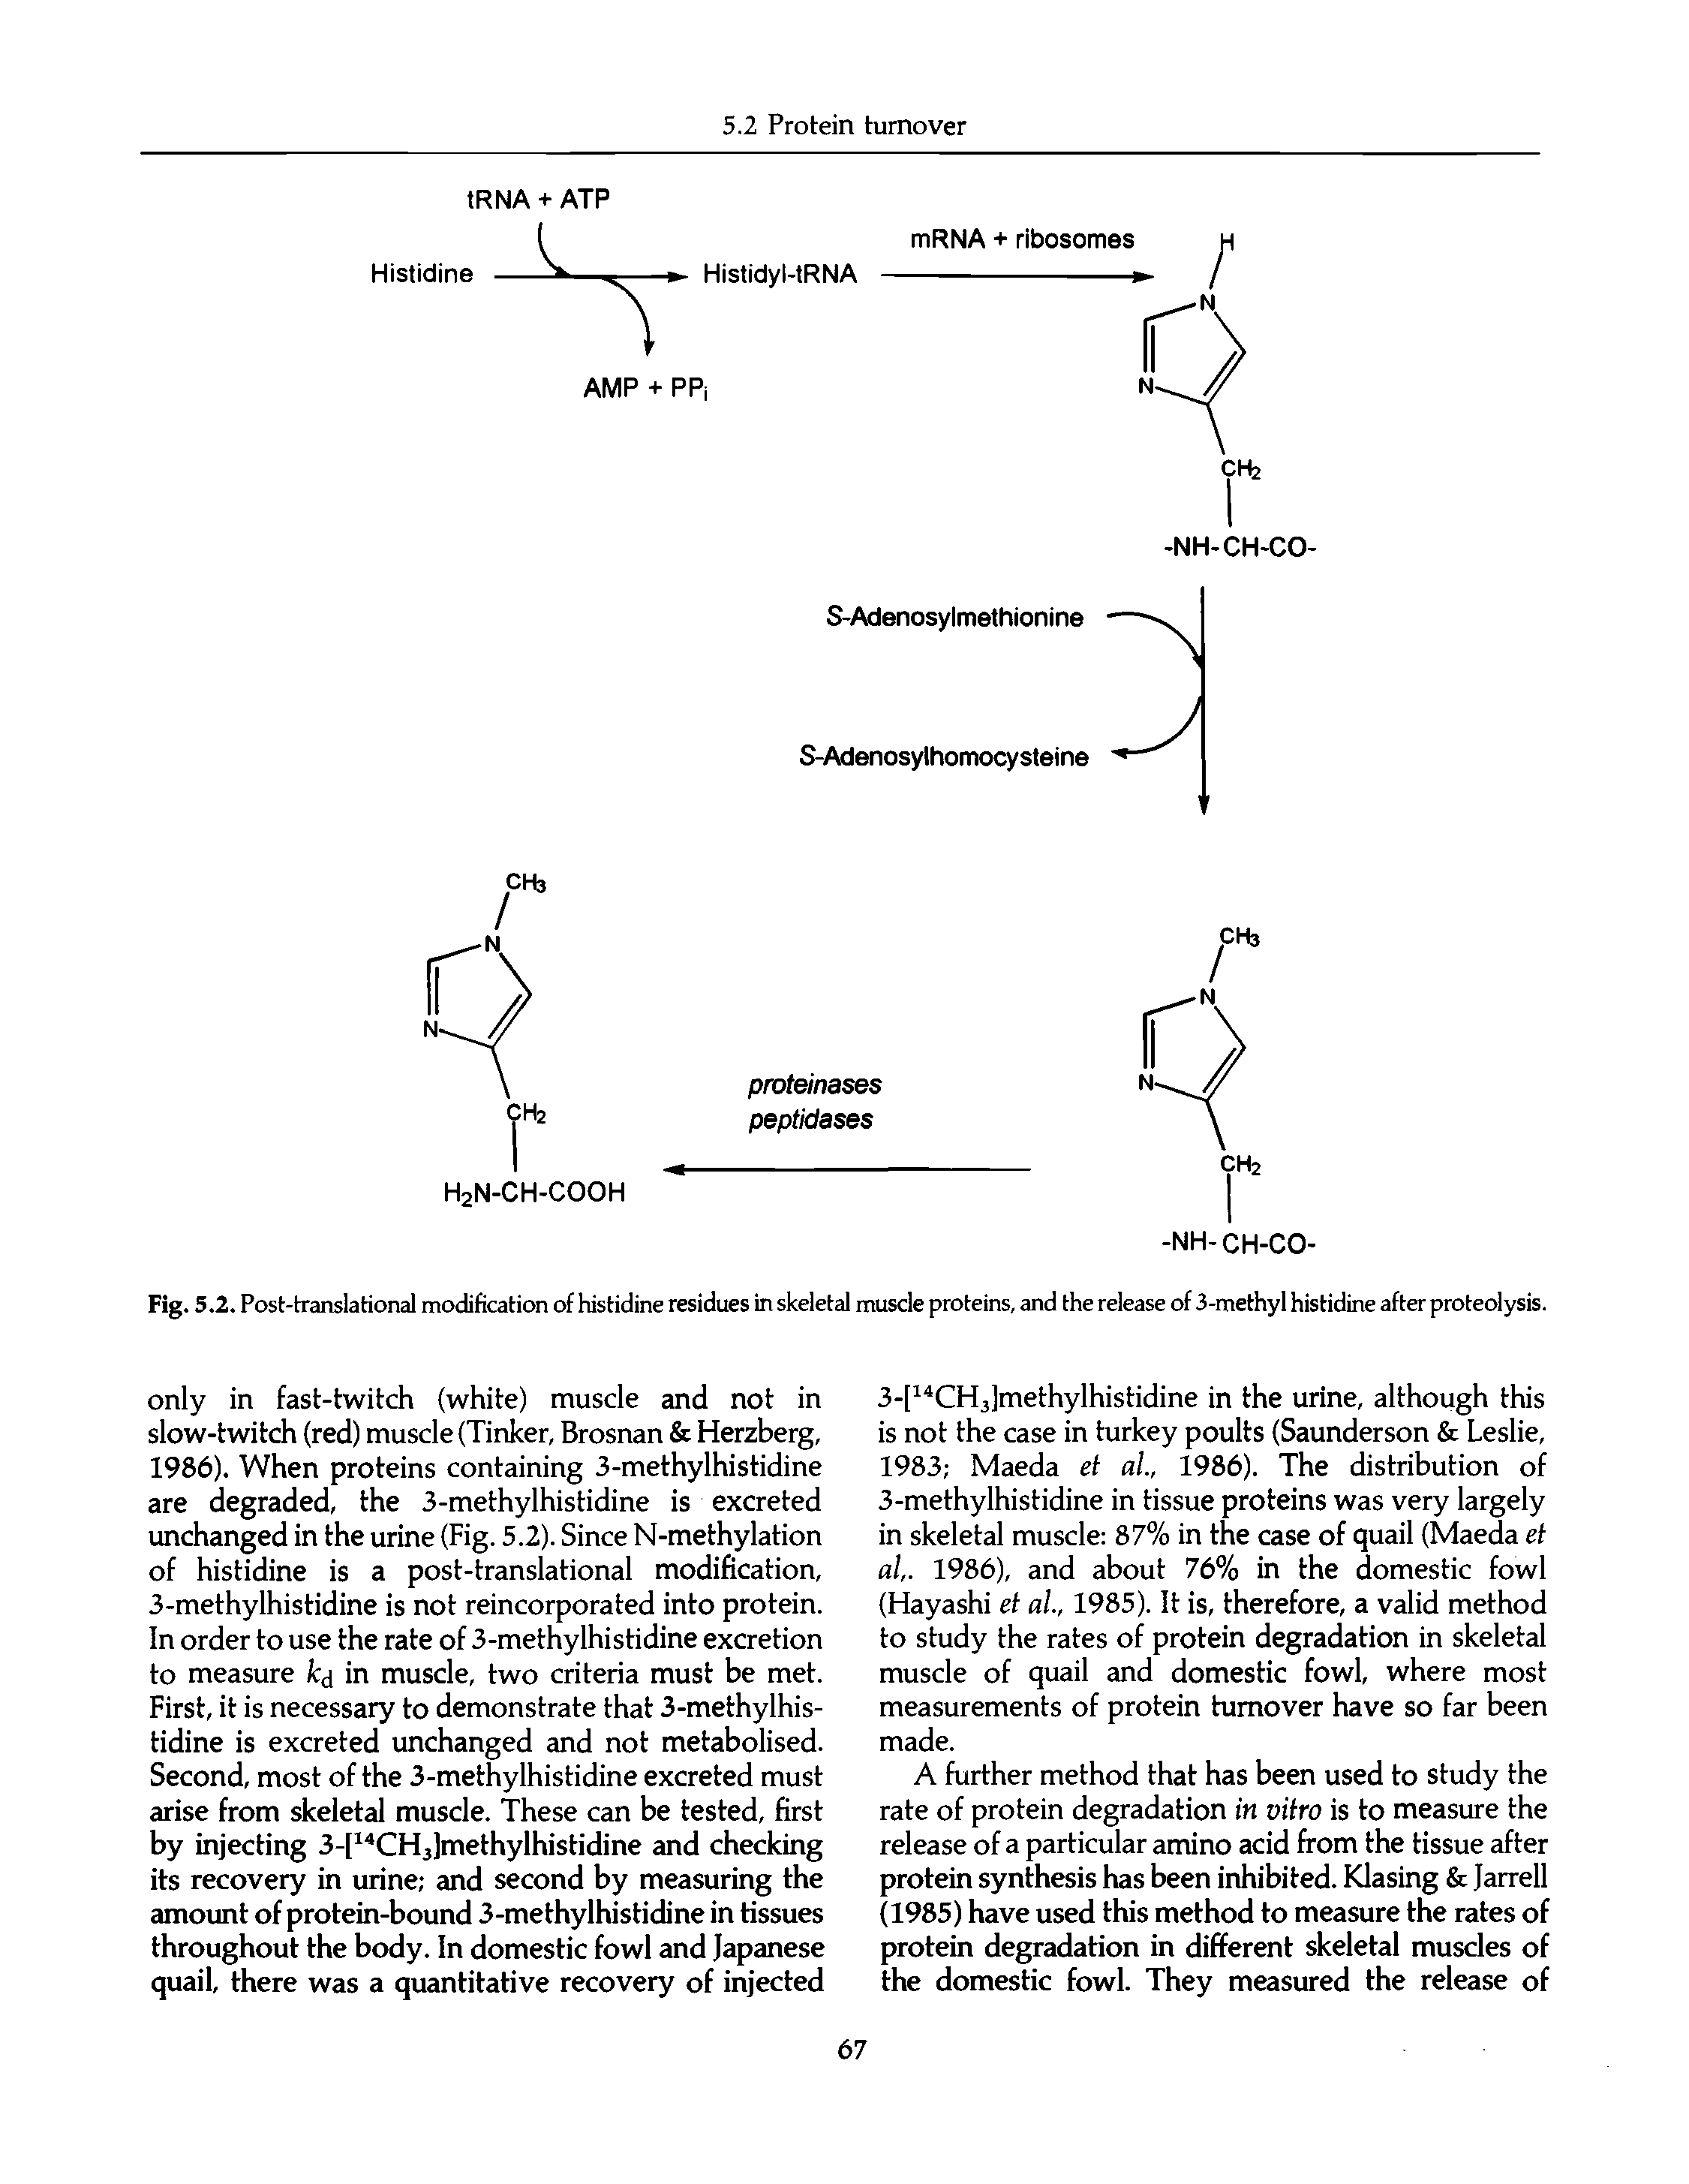 Fig.5.2. Post-translational modification of histidine residues in skeletal muscle proteins, and the release of 3-methyl histidine after proteolysis.